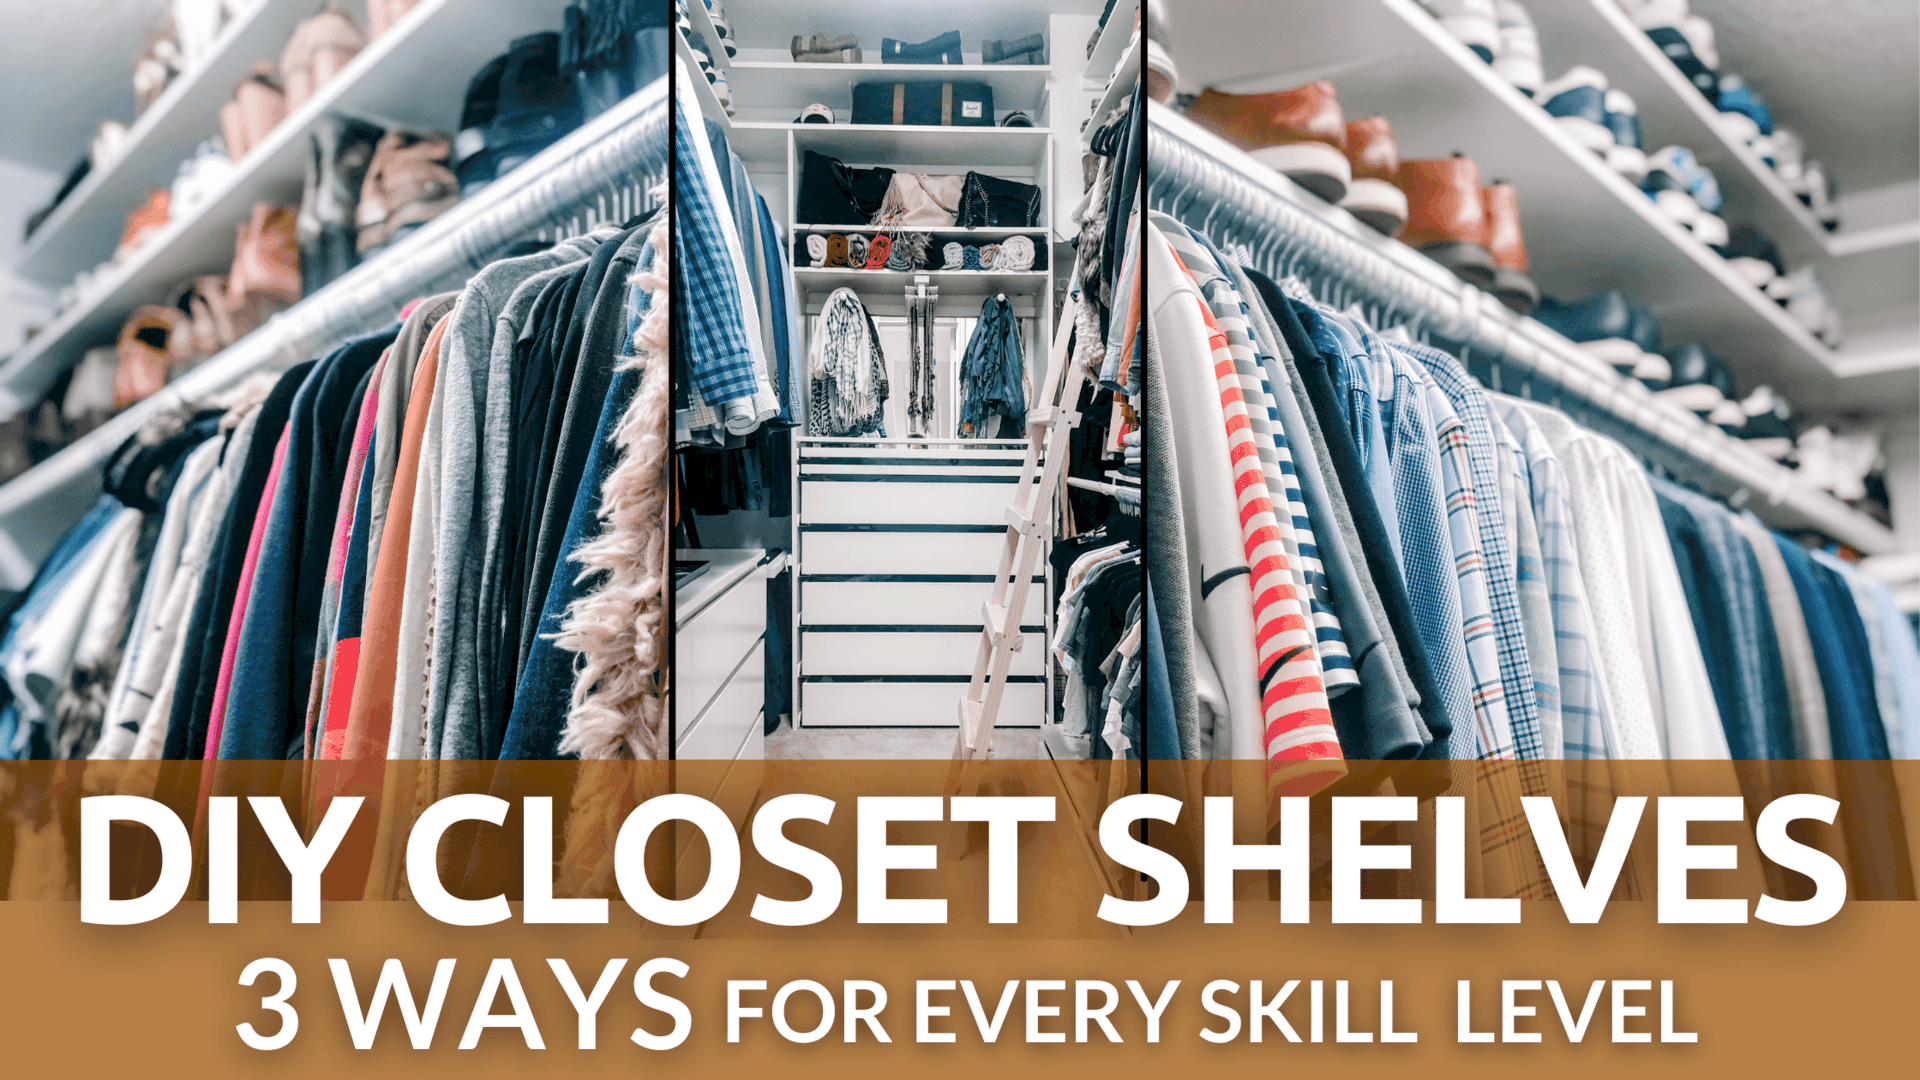 diy closet shelves installed 3 different ways for 3 different skill levels